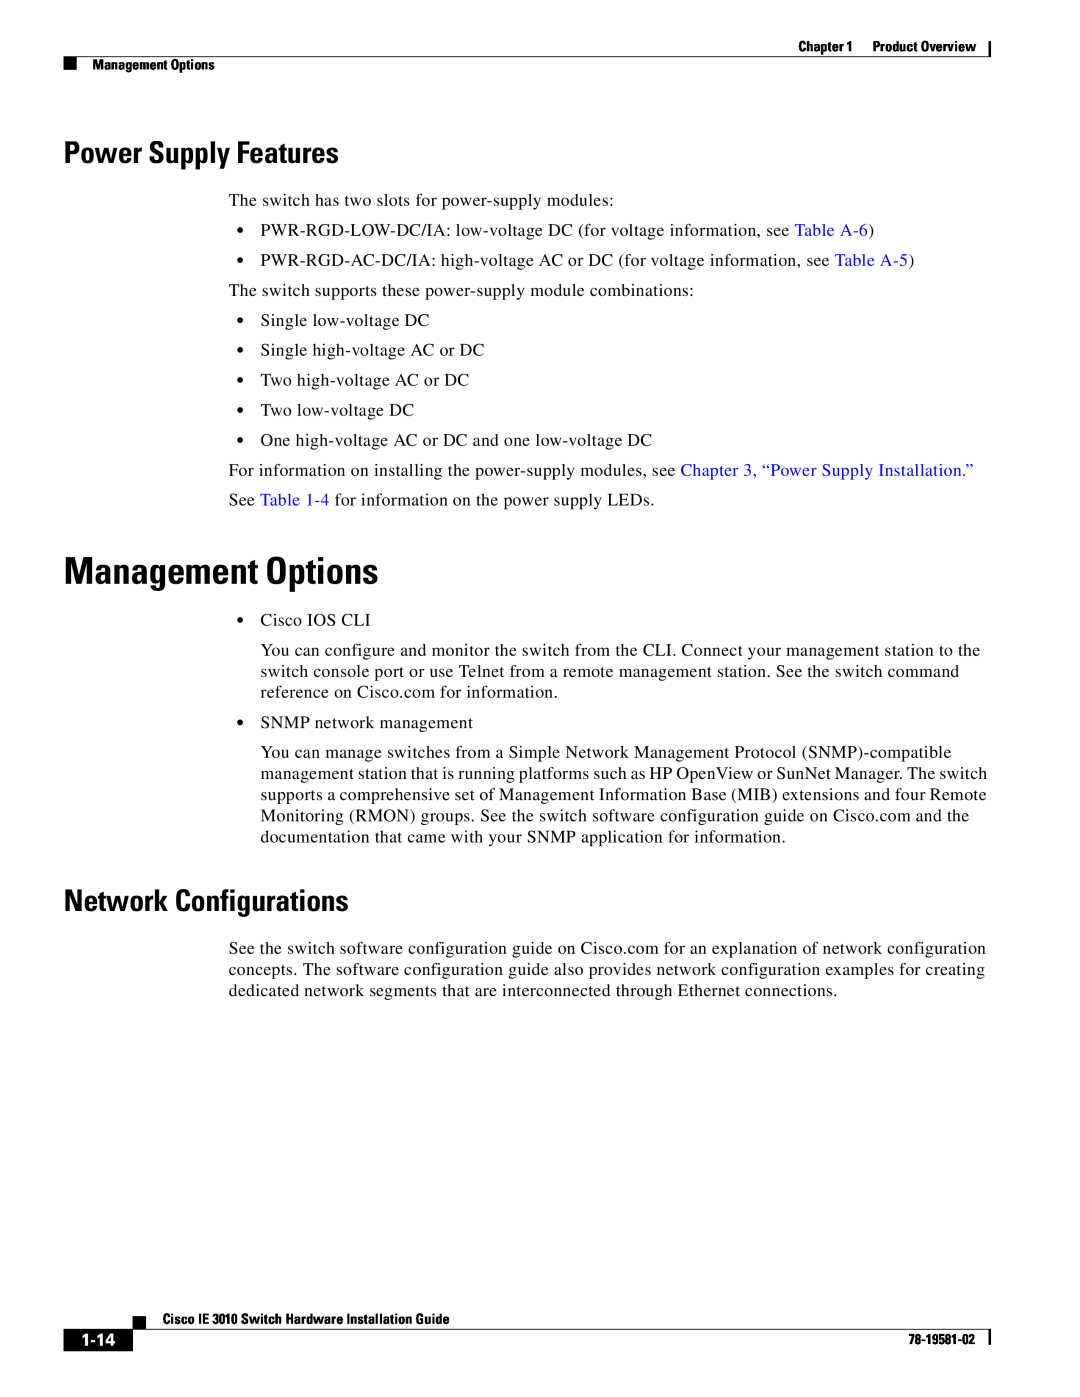 Cisco Systems IE301024TC manual Management Options, Power Supply Features, Network Configurations, 1-14 